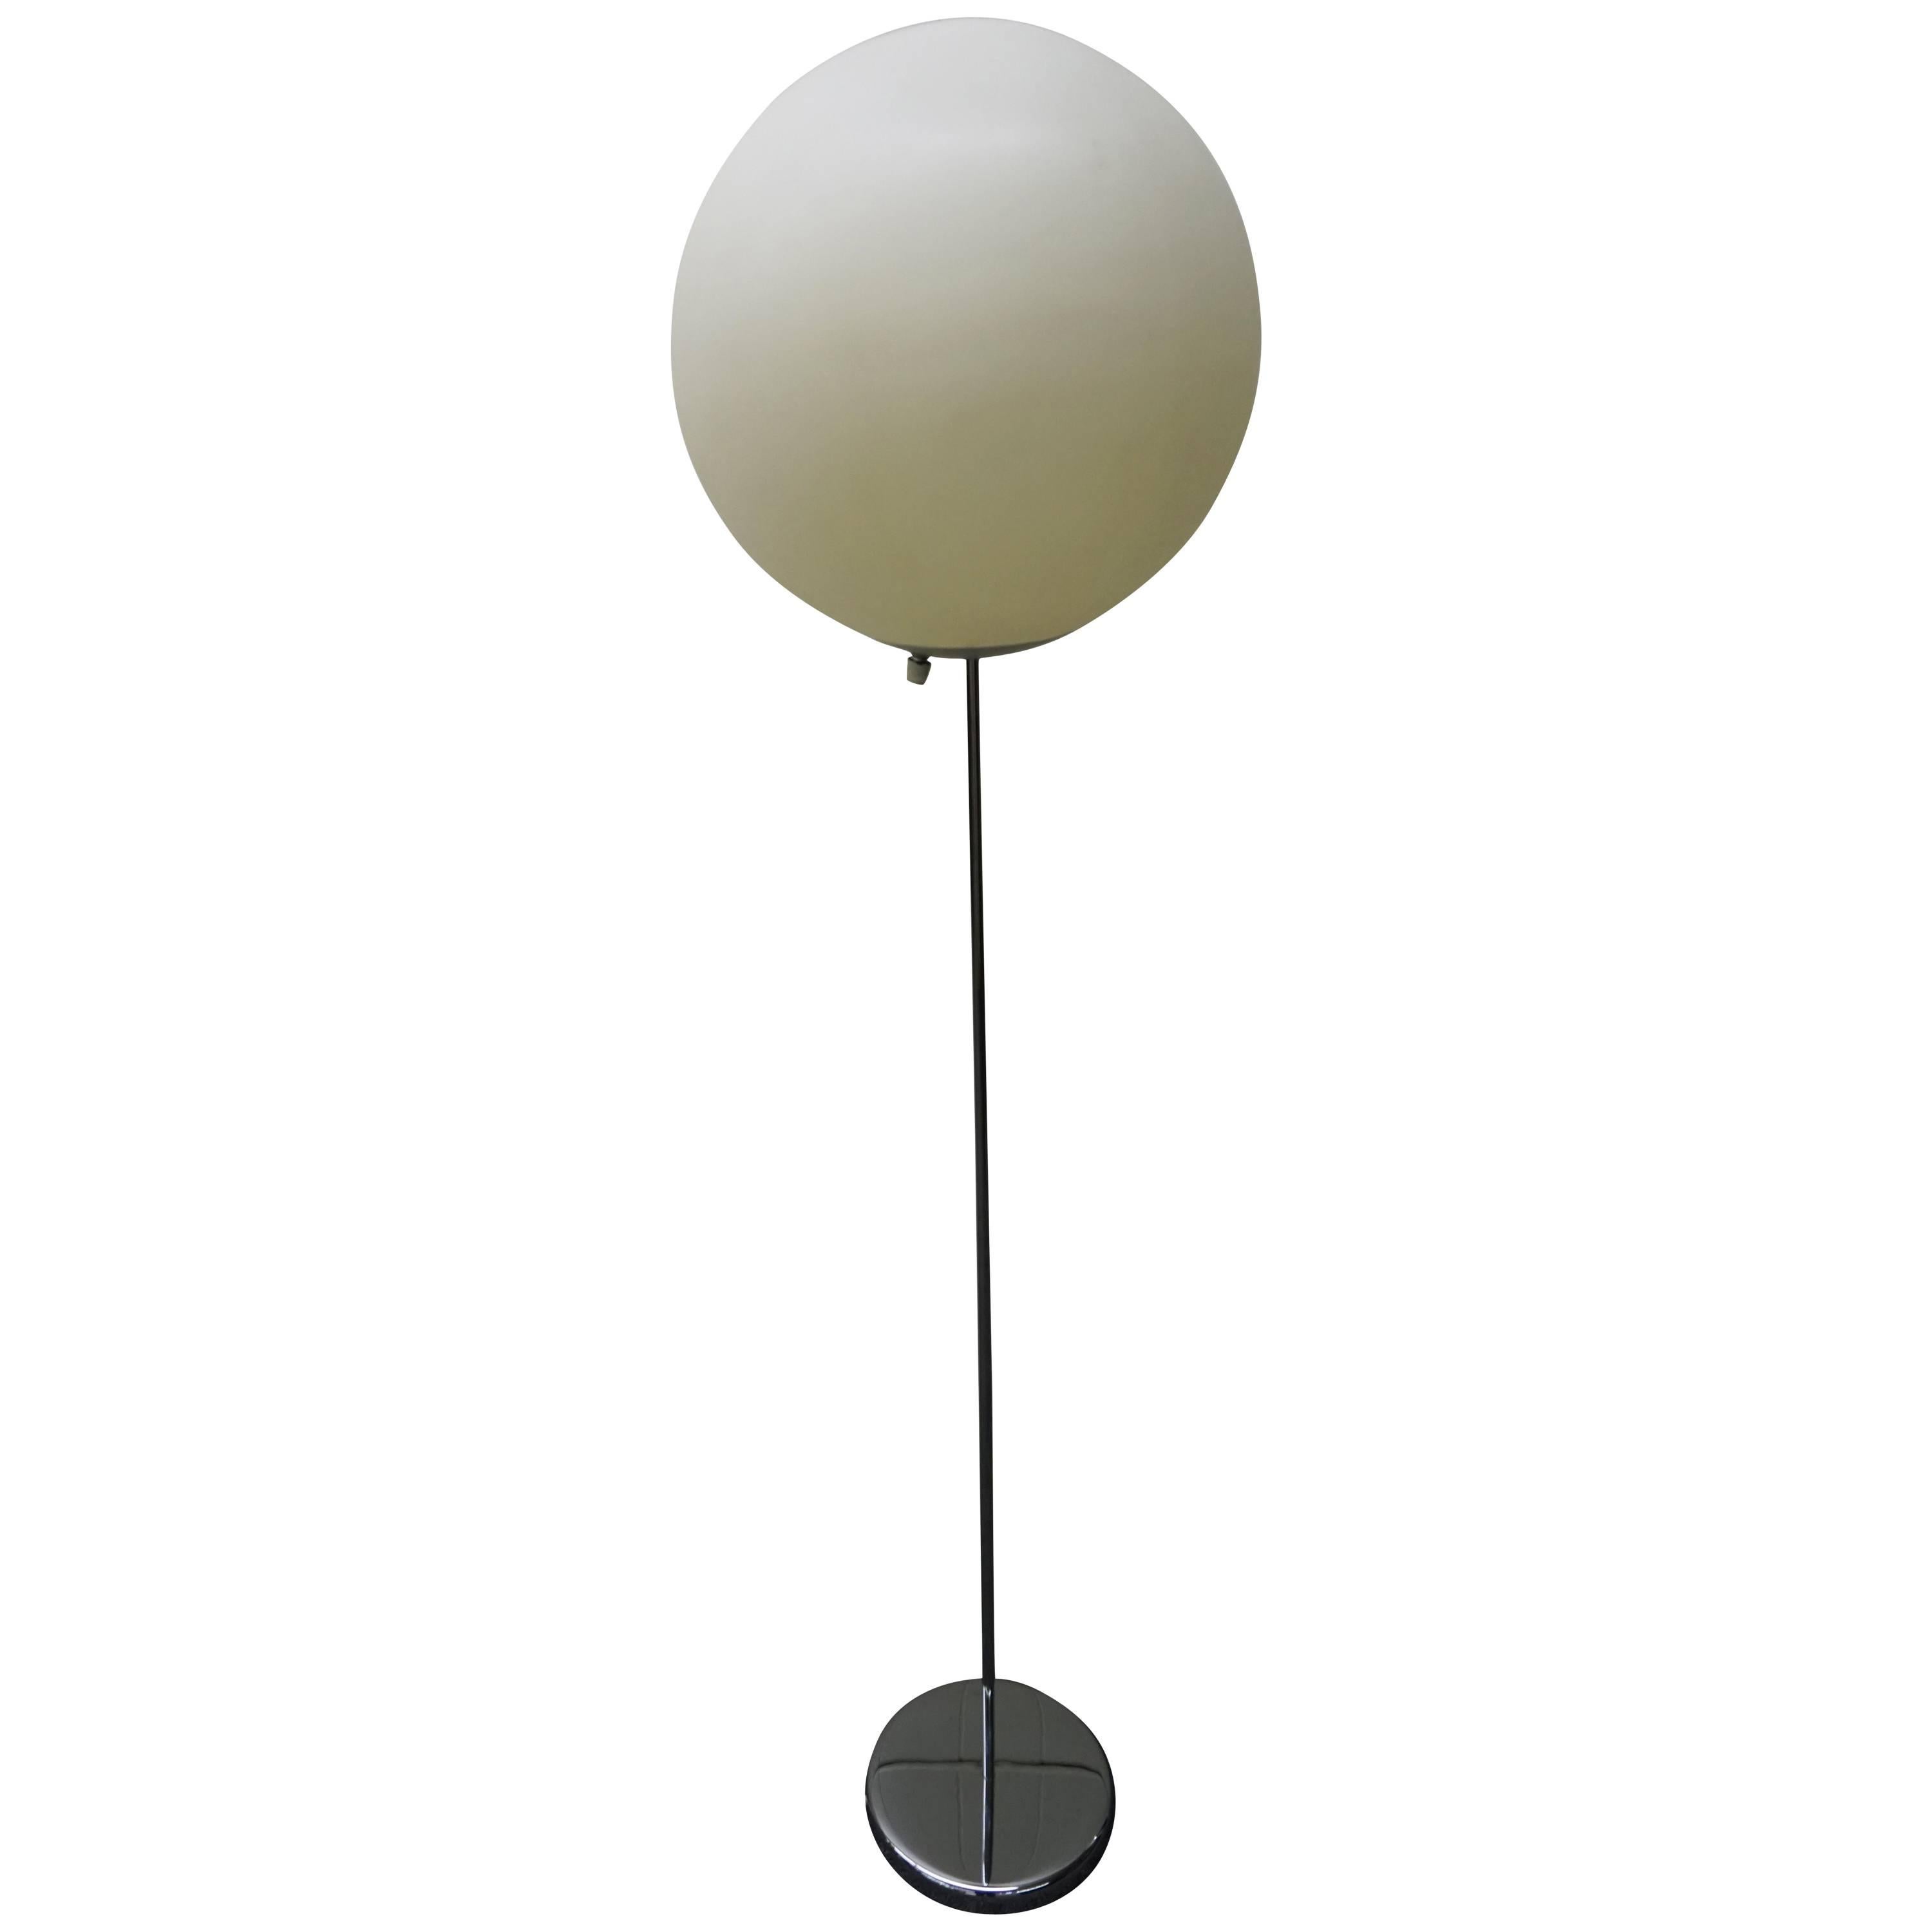 Fun Large Panton Style Ball Globe Floor Lamp with Chrome Base For Sale